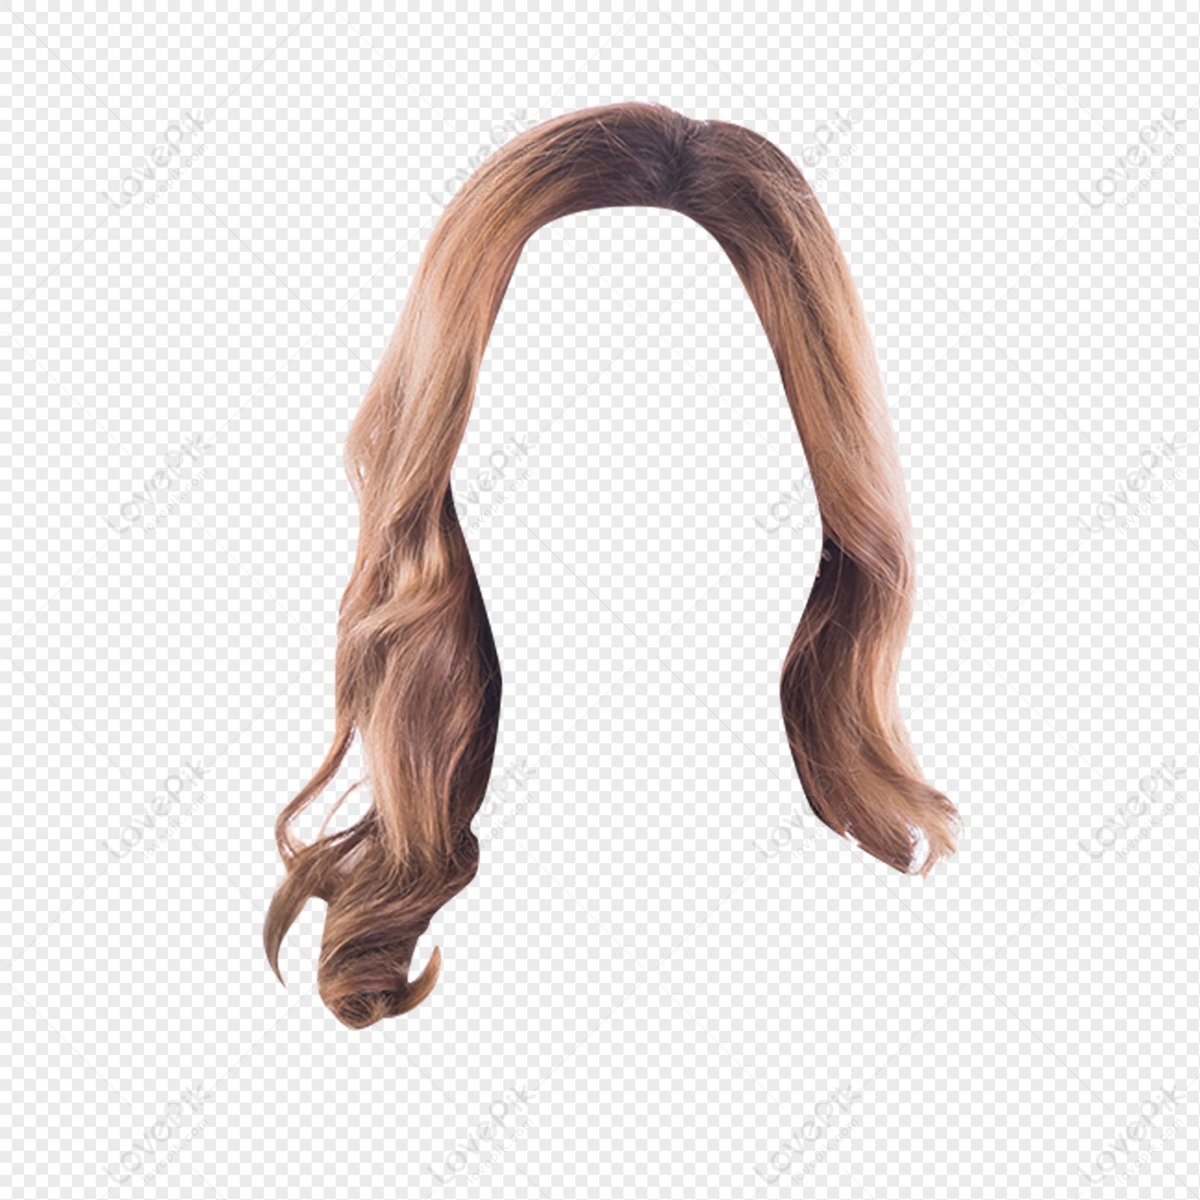 Blond Lady Hair Hairstyle Wig PNG Hd Transparent Image And Clipart Image  For Free Download - Lovepik | 401770184